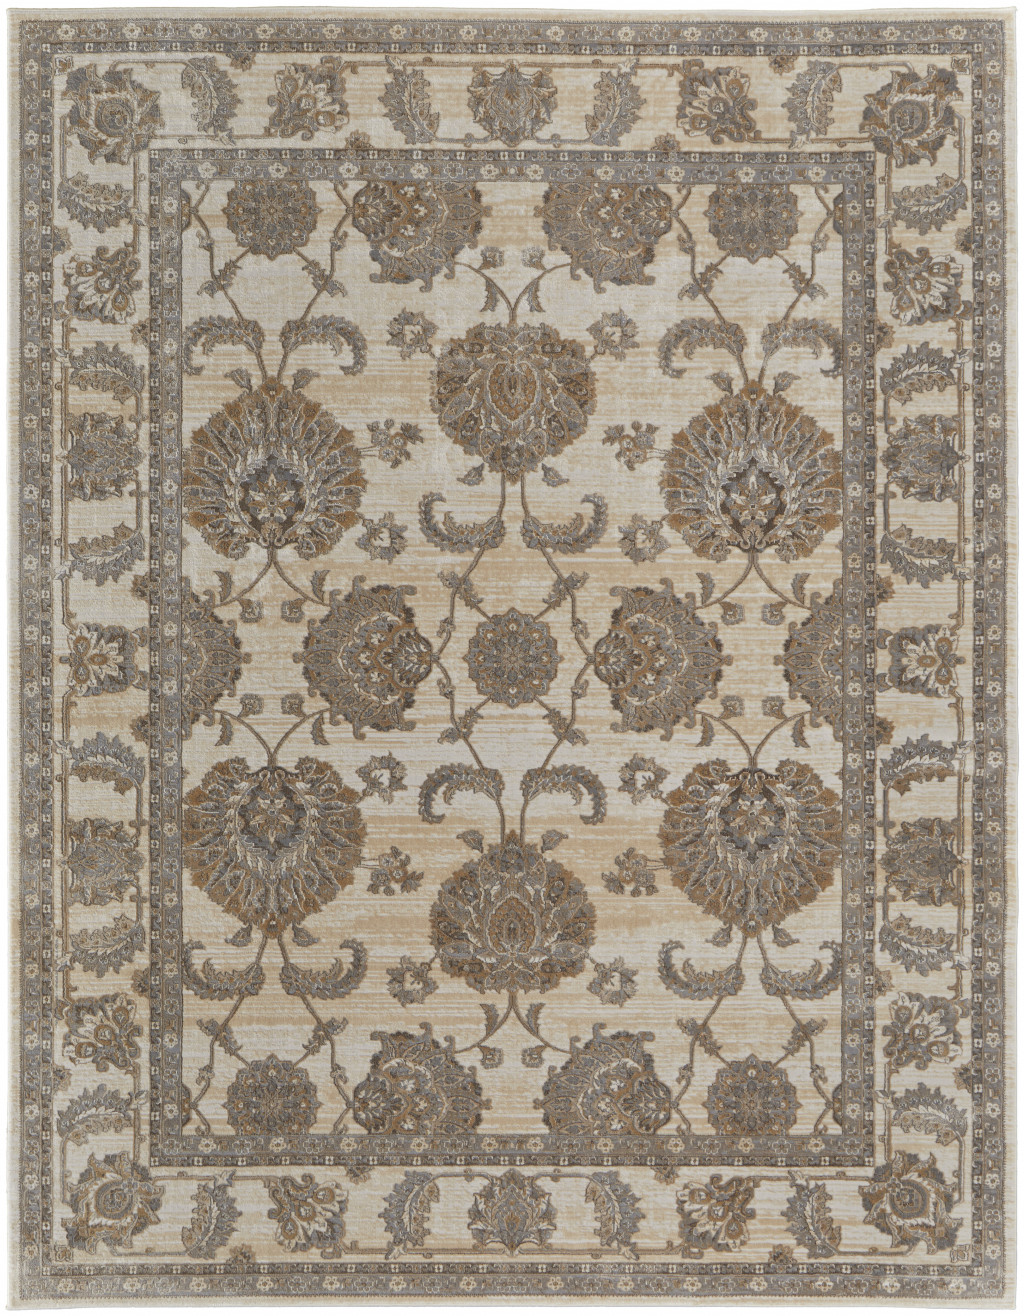 8' X 10' Tan Ivory And Brown Power Loom Area Rug-515500-1